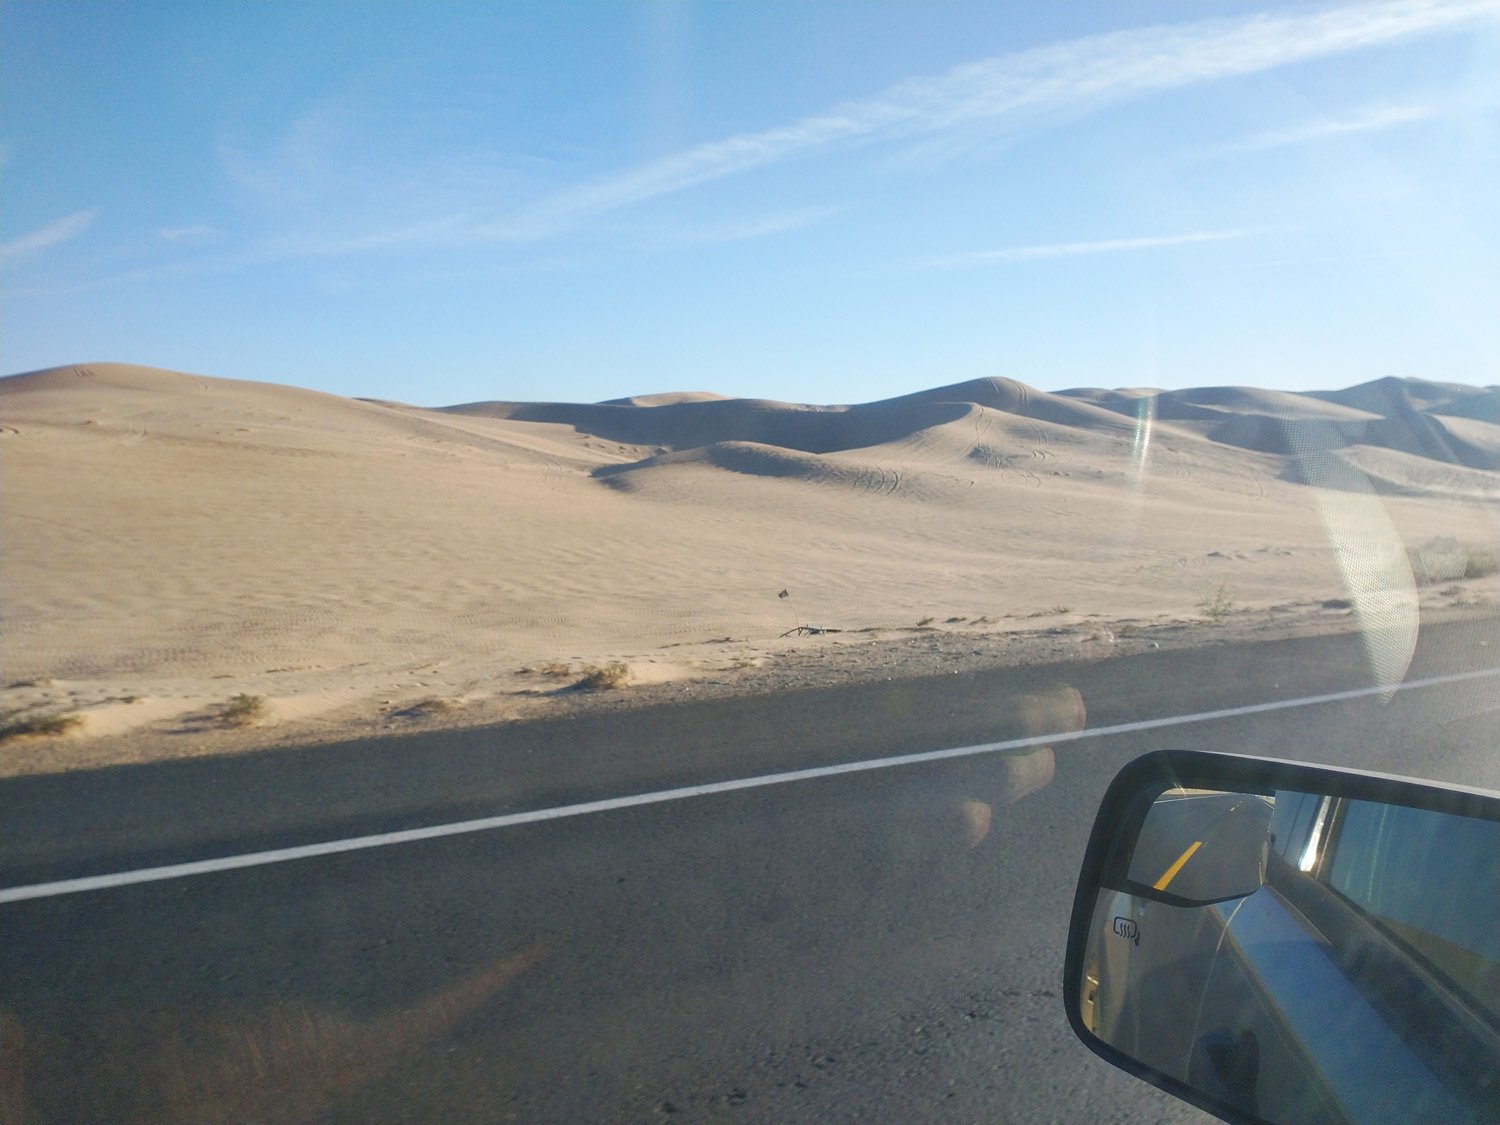 On the drive I passed through this huge actual desert complete with dunes and people riding around on them.